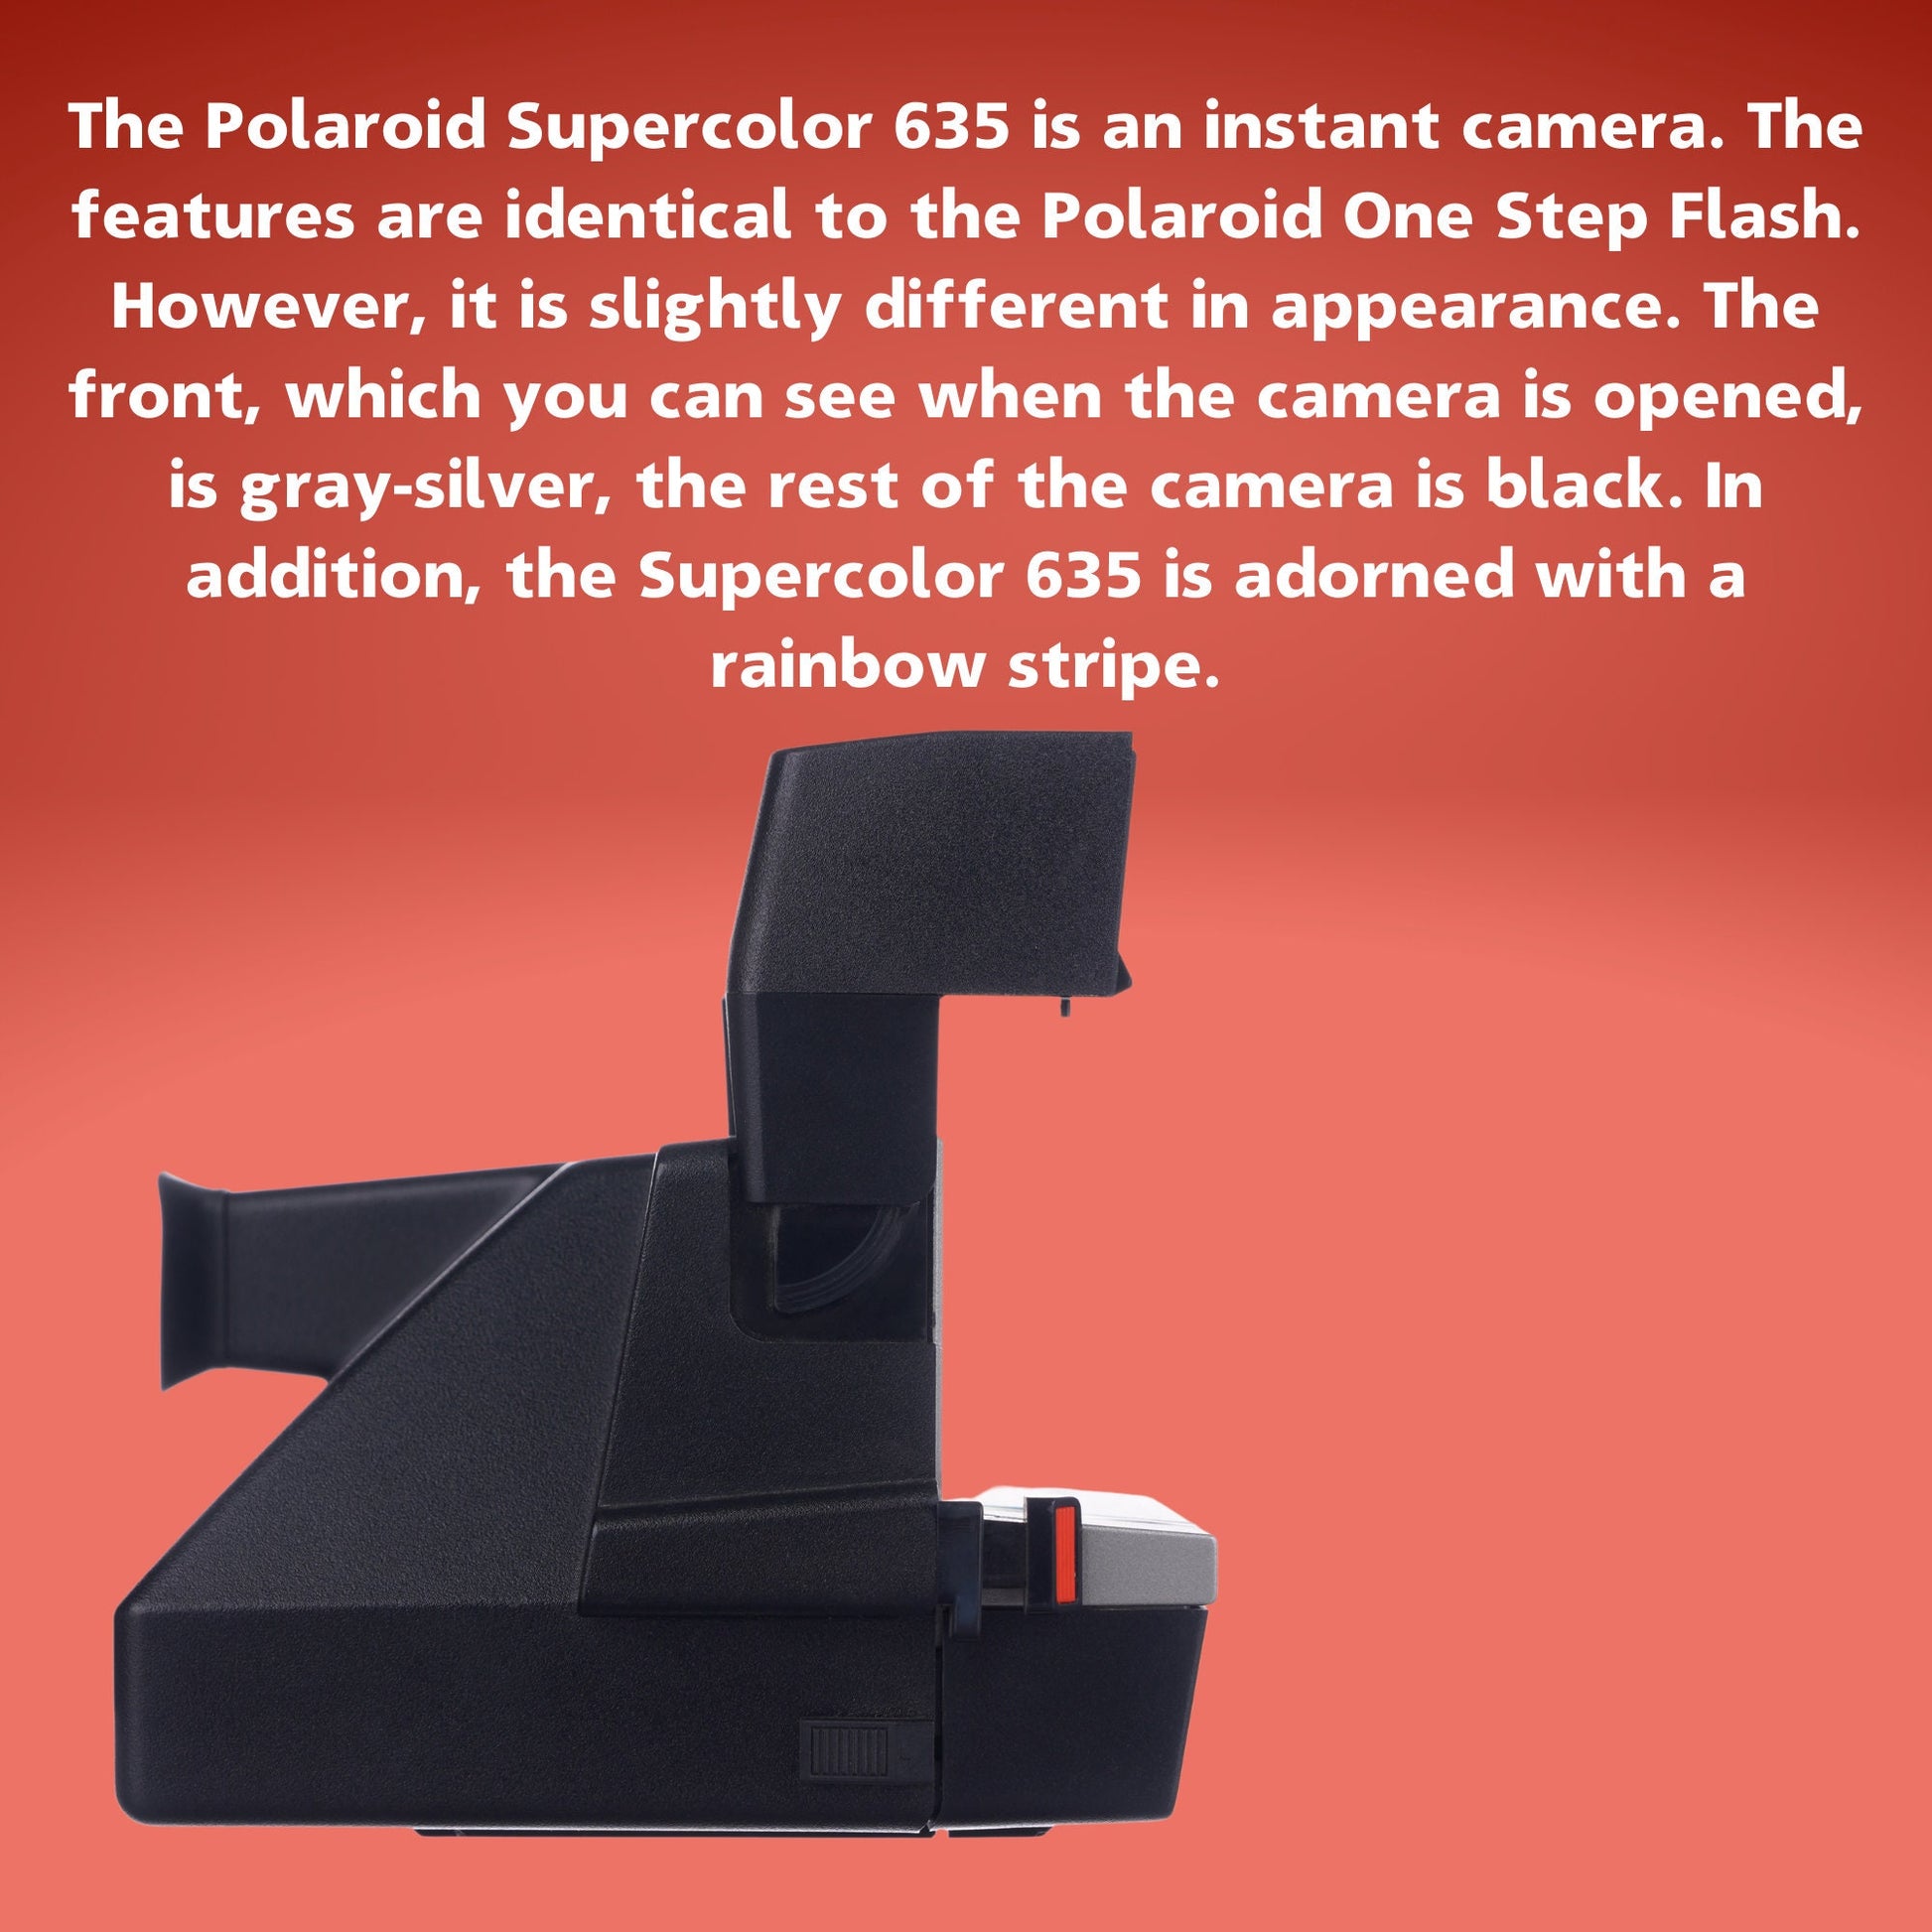 Say Cheese! Capture Memories in Style with the Polaroid Supercolor 635CL Instant Camera - Perfectly Vintage and Ready to Snap! - Vintage Polaroid Instant Cameras